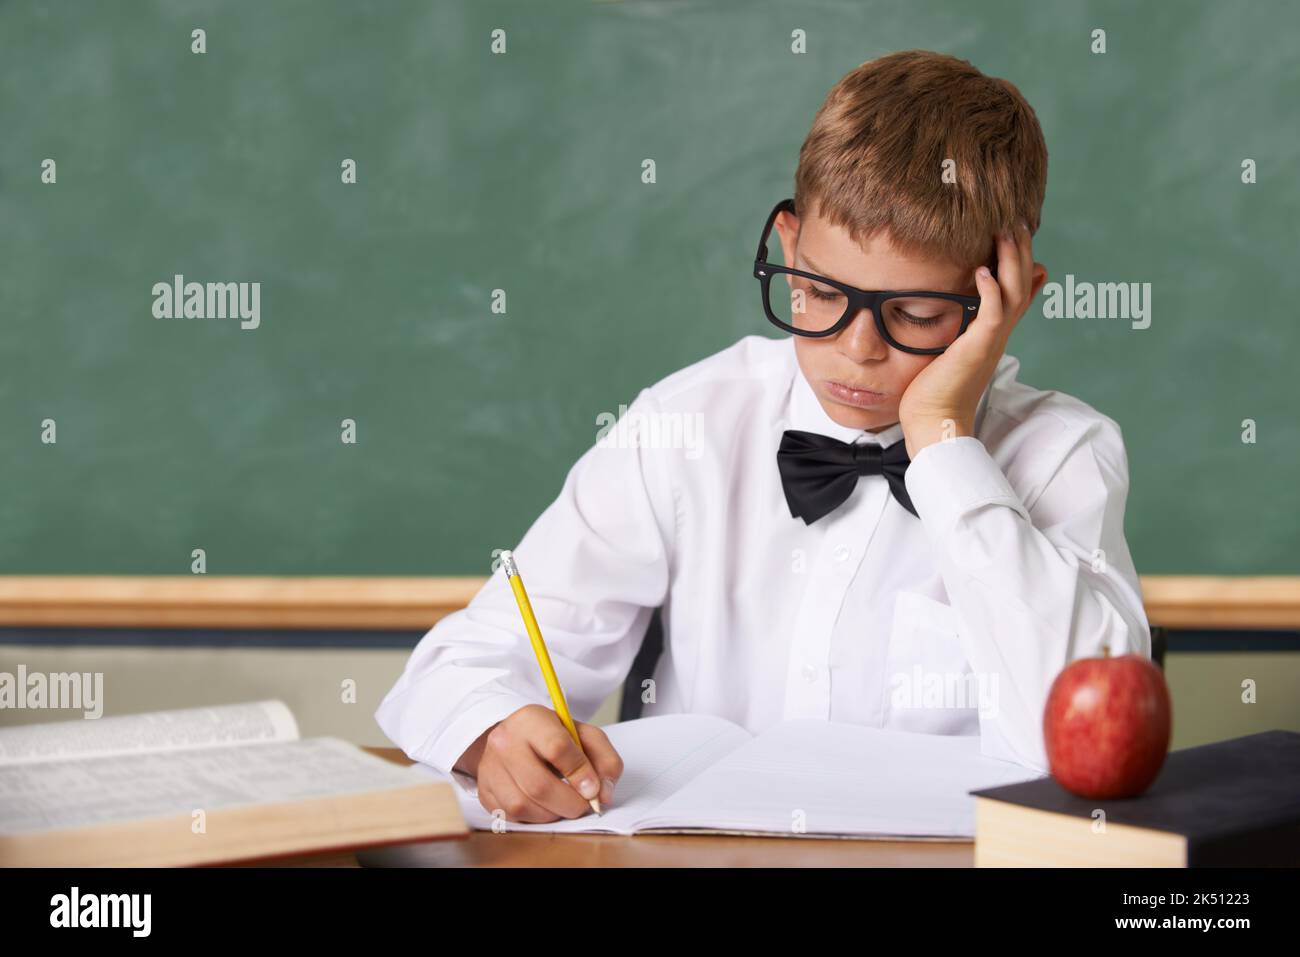 Not another test. A young boy with glasses and a bow-tie sitting in class writing despondently in a book. Stock Photo